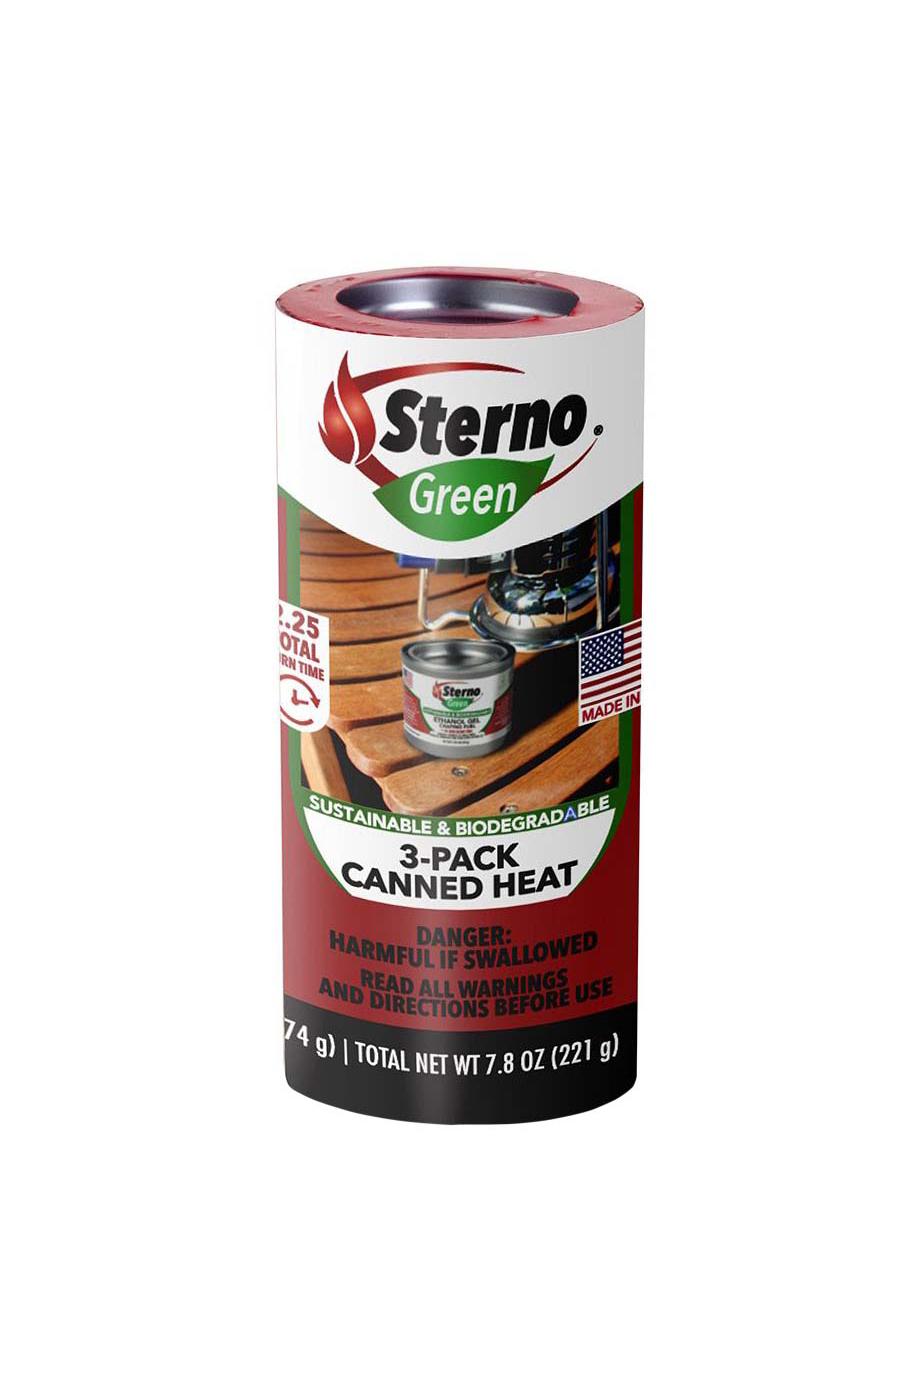 Sterno Green Canned Heat; image 1 of 2